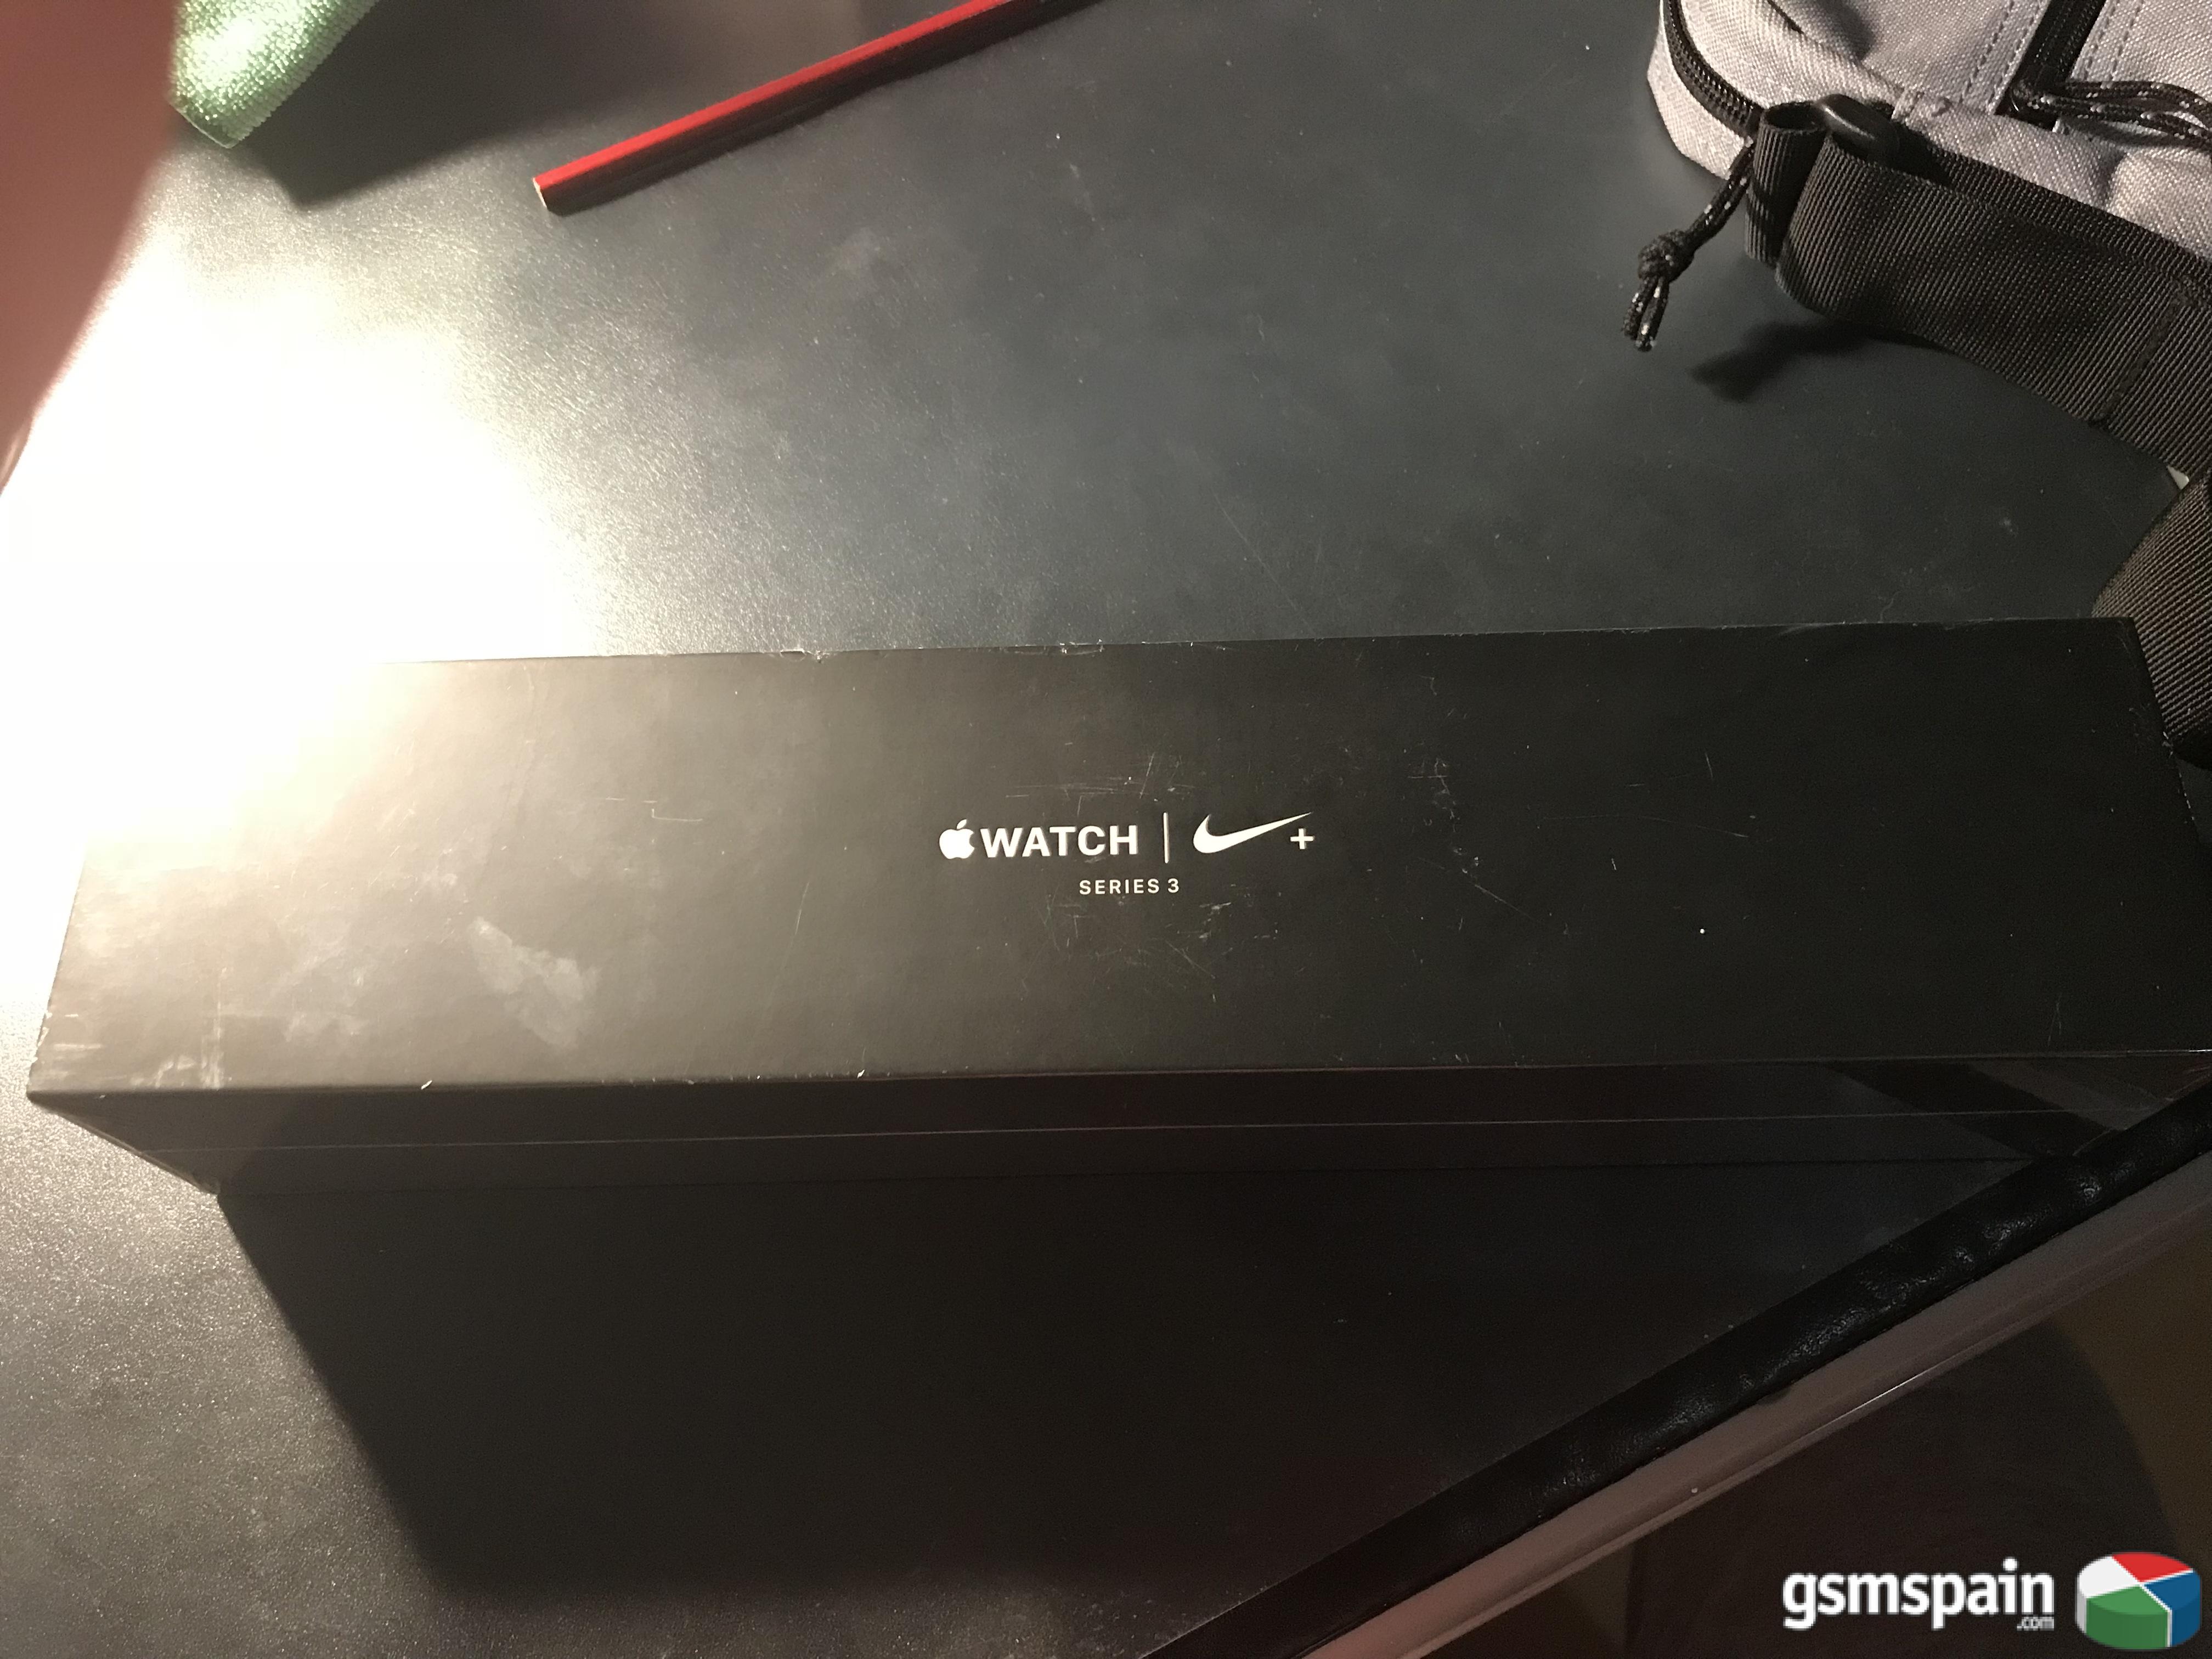 [HILO OFICIAL] Apple Watch series 3